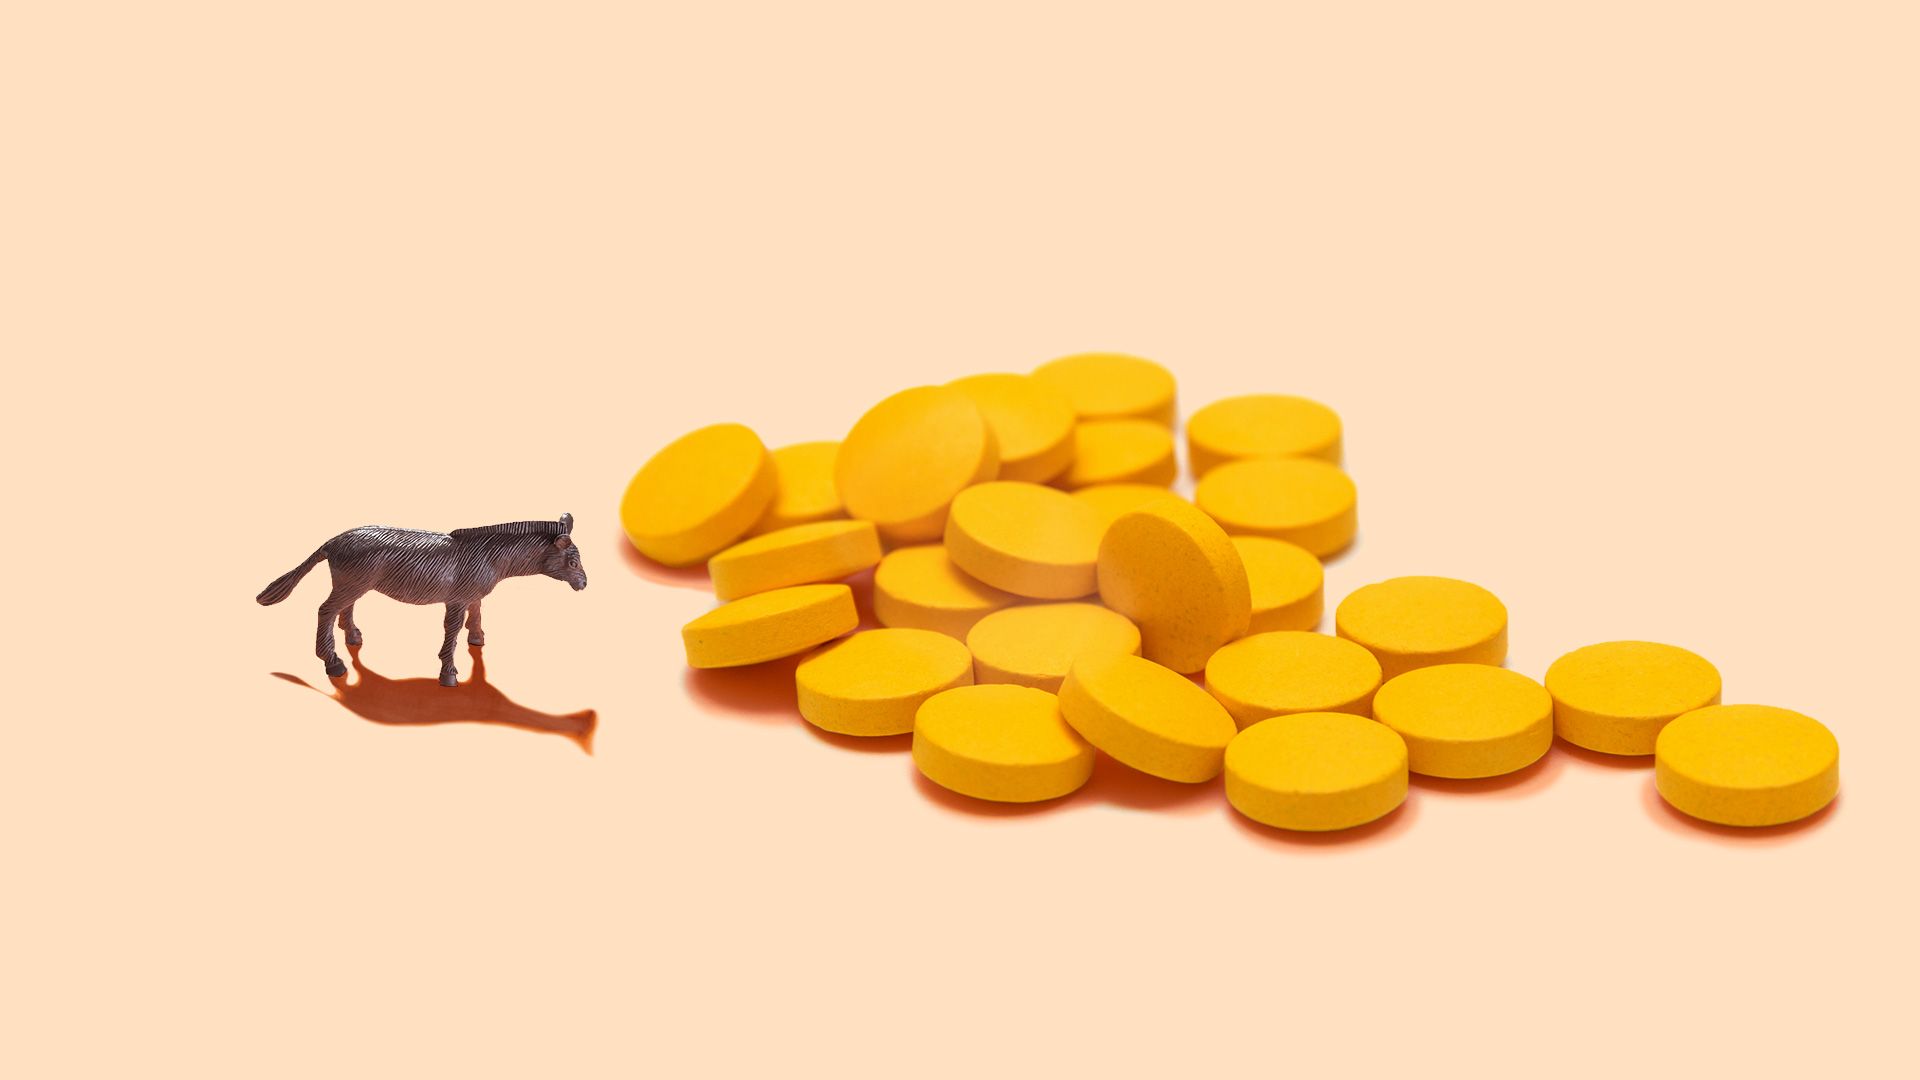 Illustration of a miniature toy donkey next to a large pile of pills. 